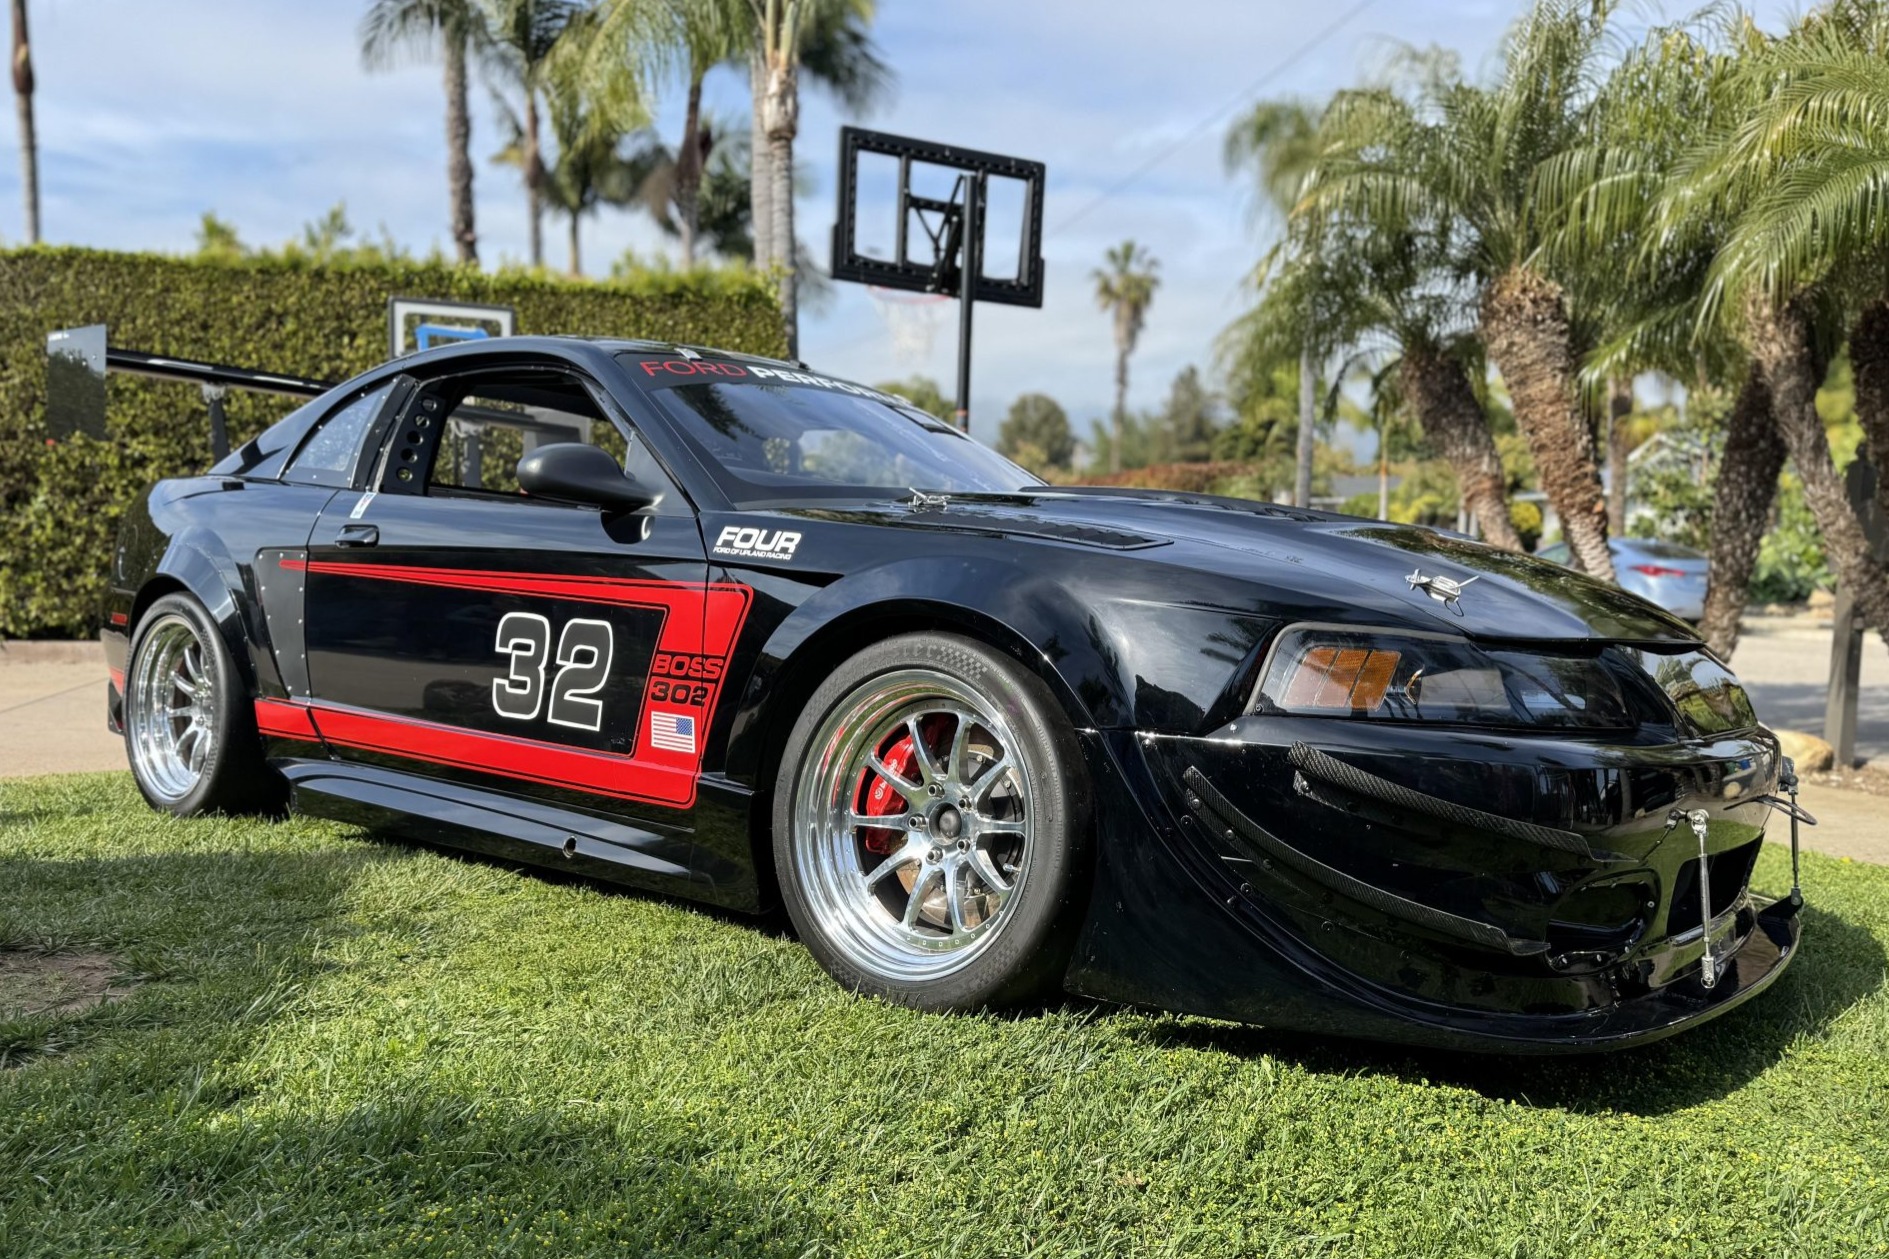 Used Coyote-Powered 1999 Ford Mustang SVT Cobra Race Car Review